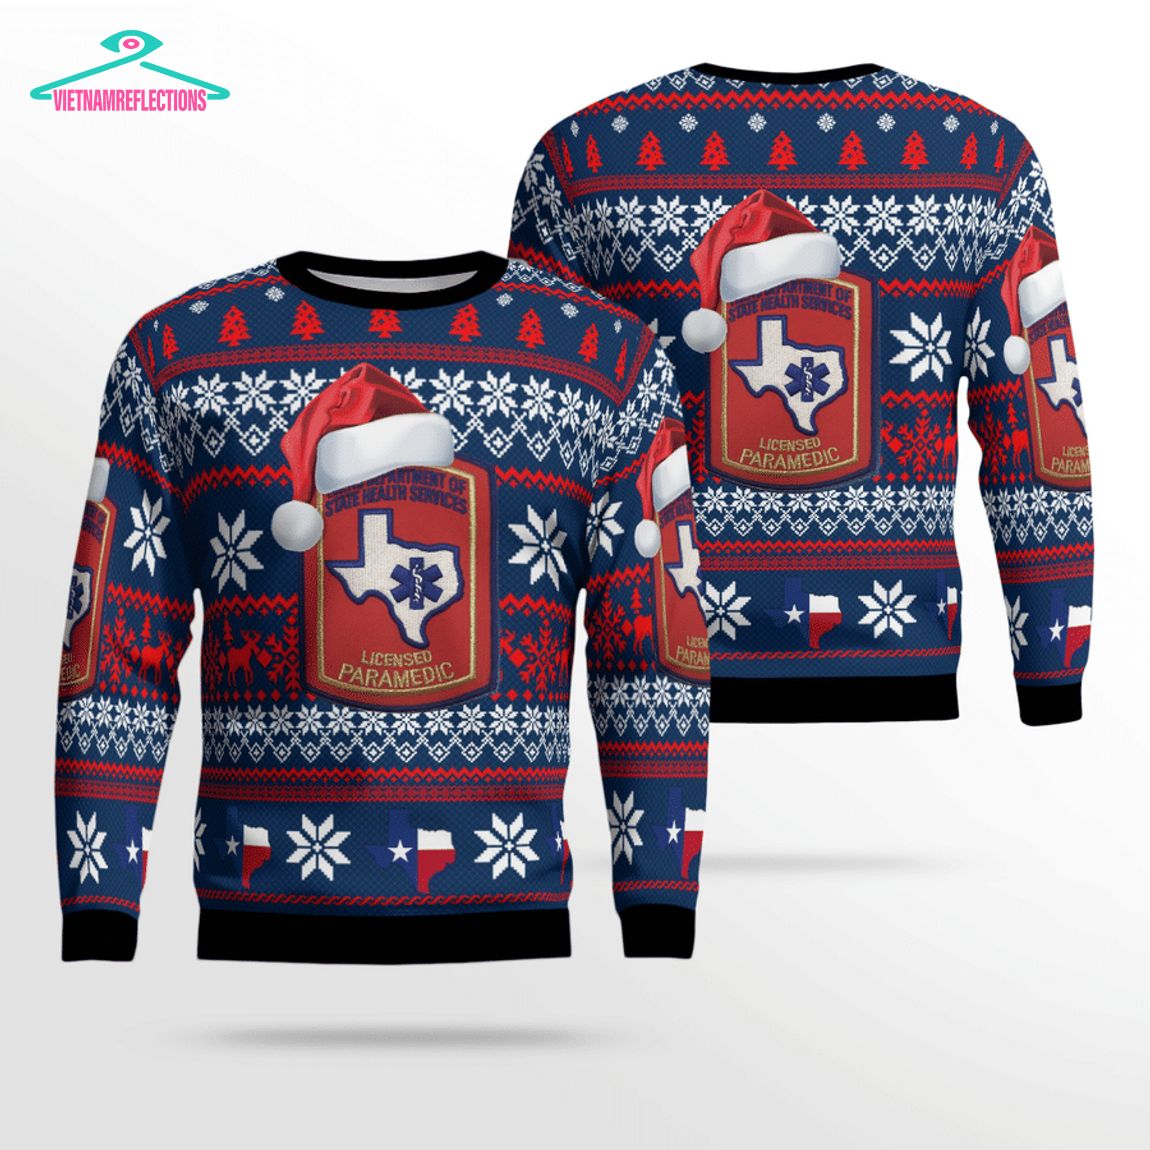 texas-department-of-state-health-services-licensed-paramedic-3d-christmas-sweater-1-Hty6L.jpg